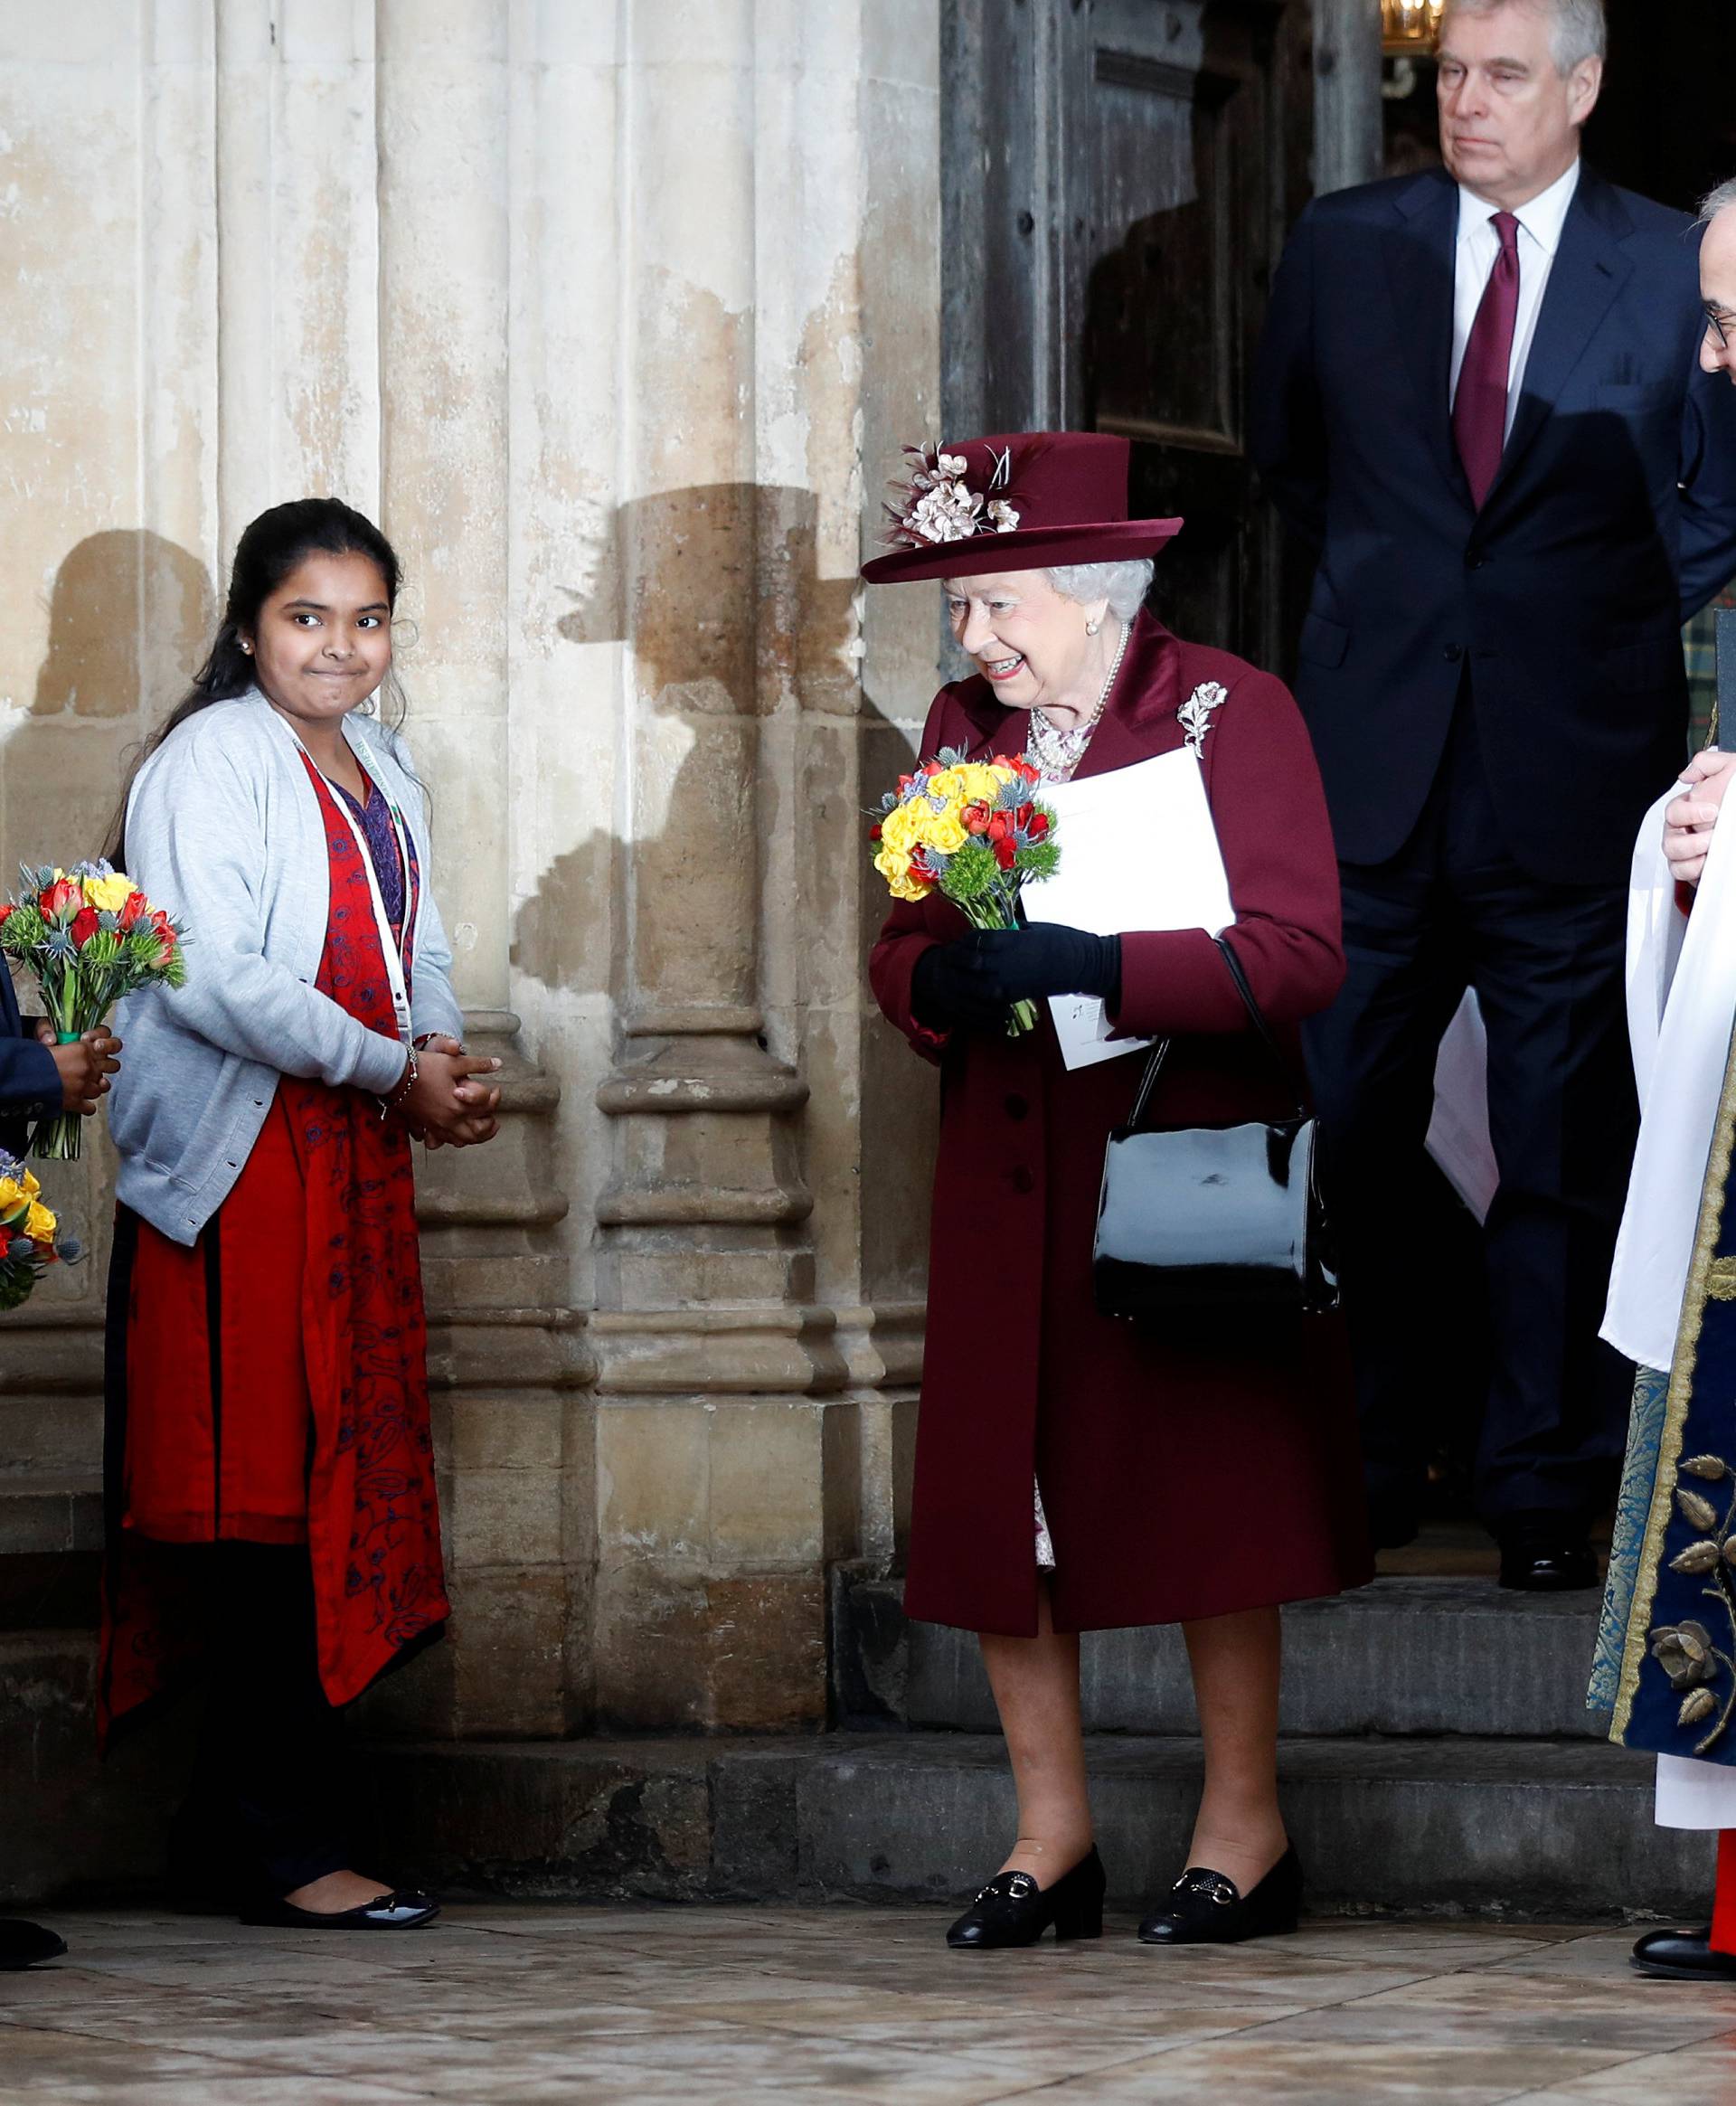 Britain's Queen Elizabeth smiles after receiving a bouquet of flowers after attending the Commonwealth Service at Westminster Abbey in London